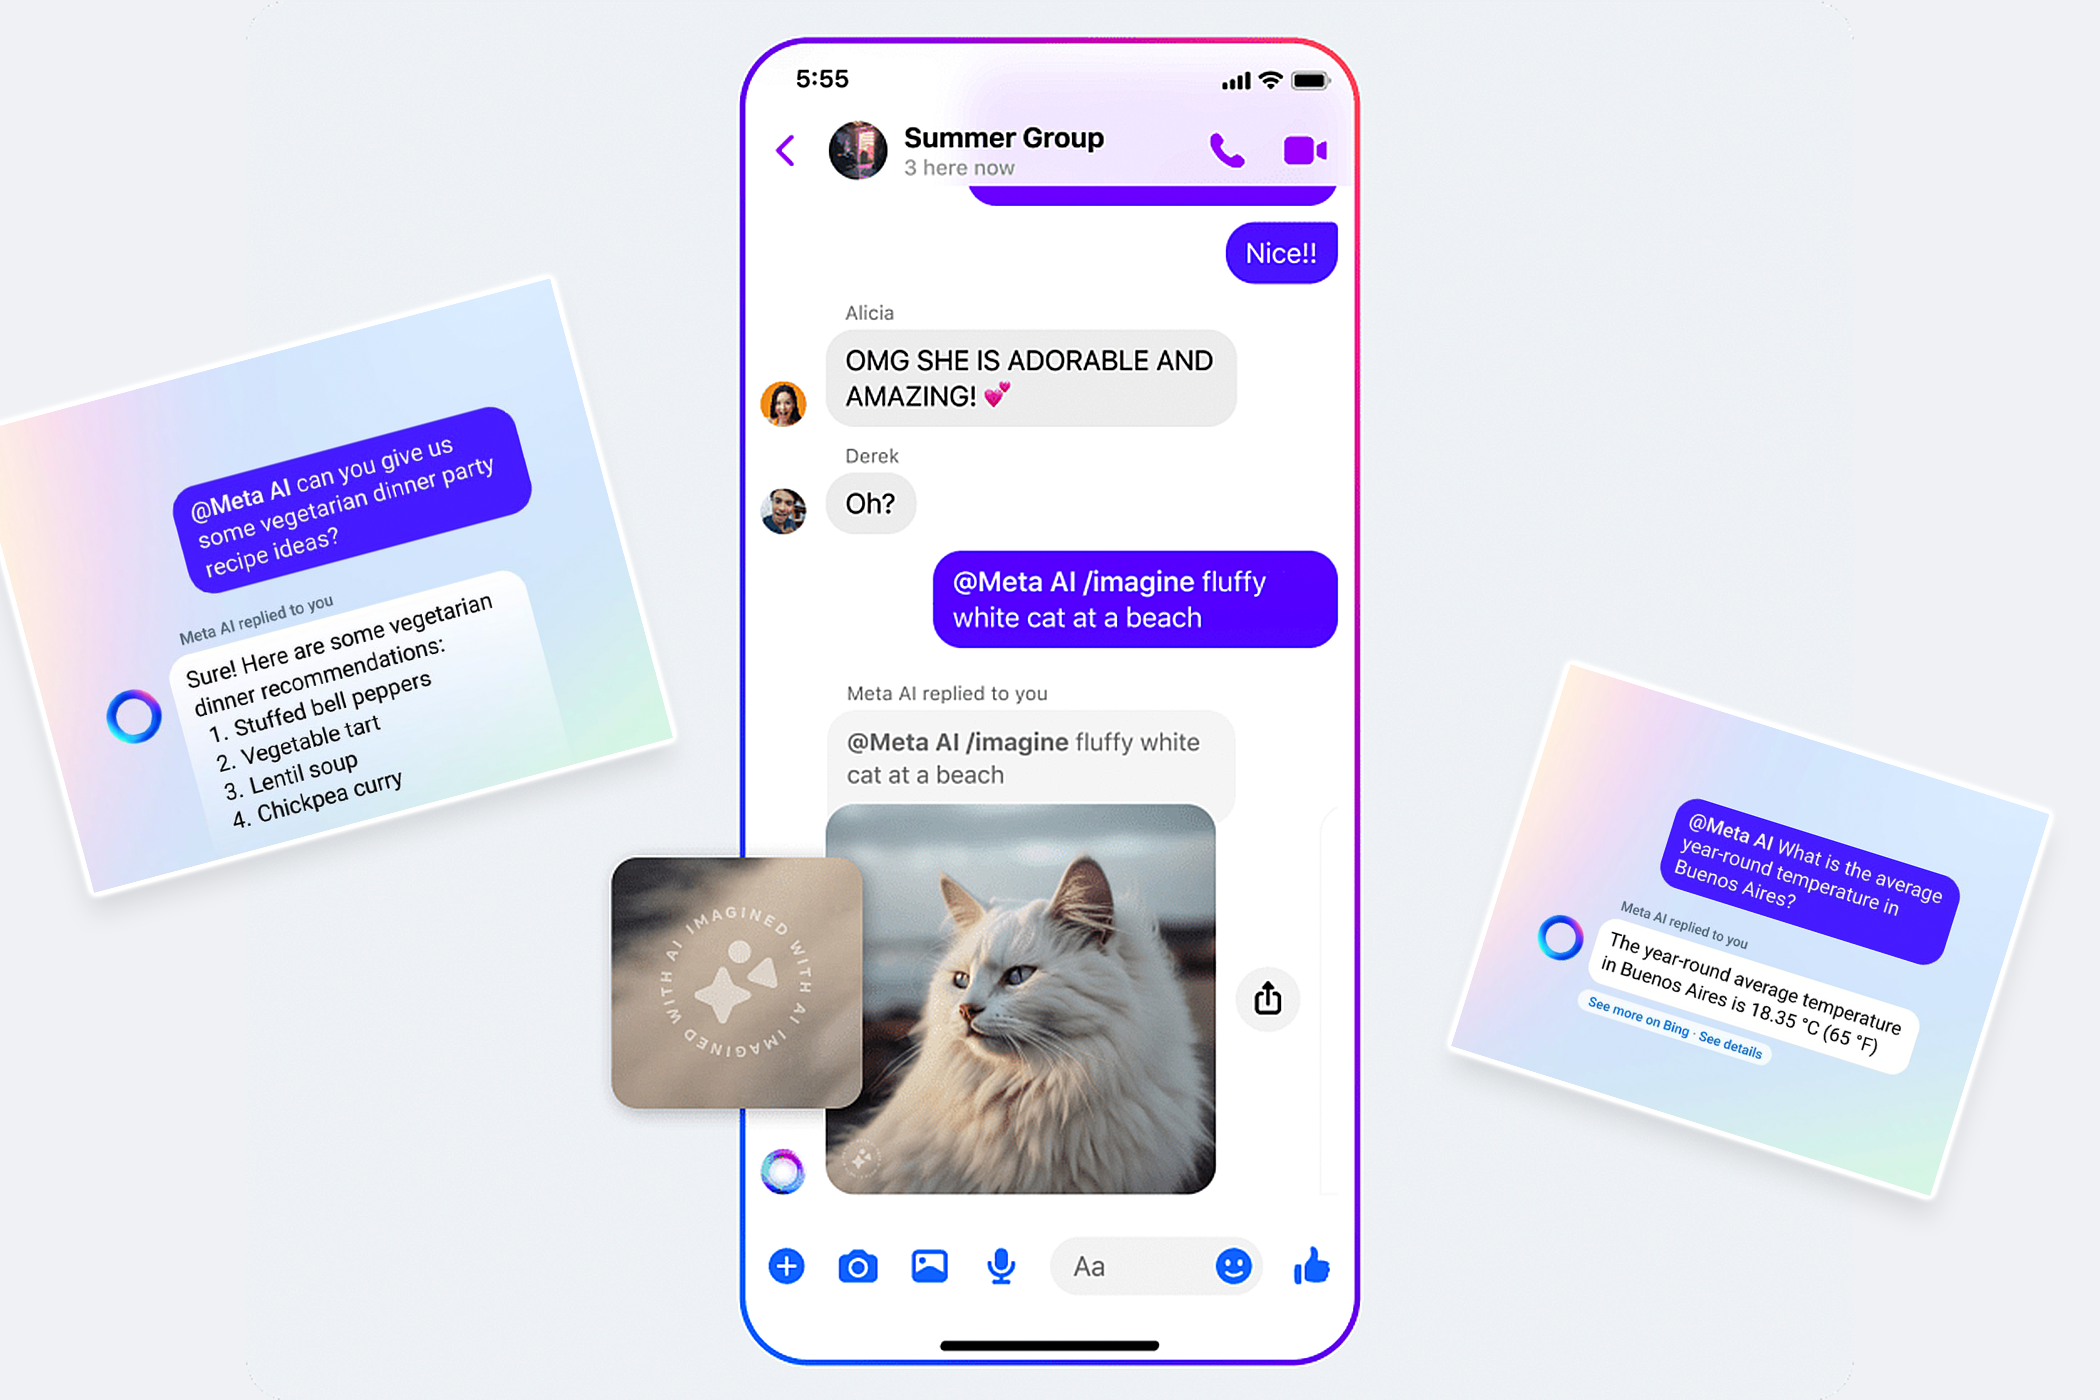 Using the Meta AI to generate images and ask questions in Facebook Messenger.